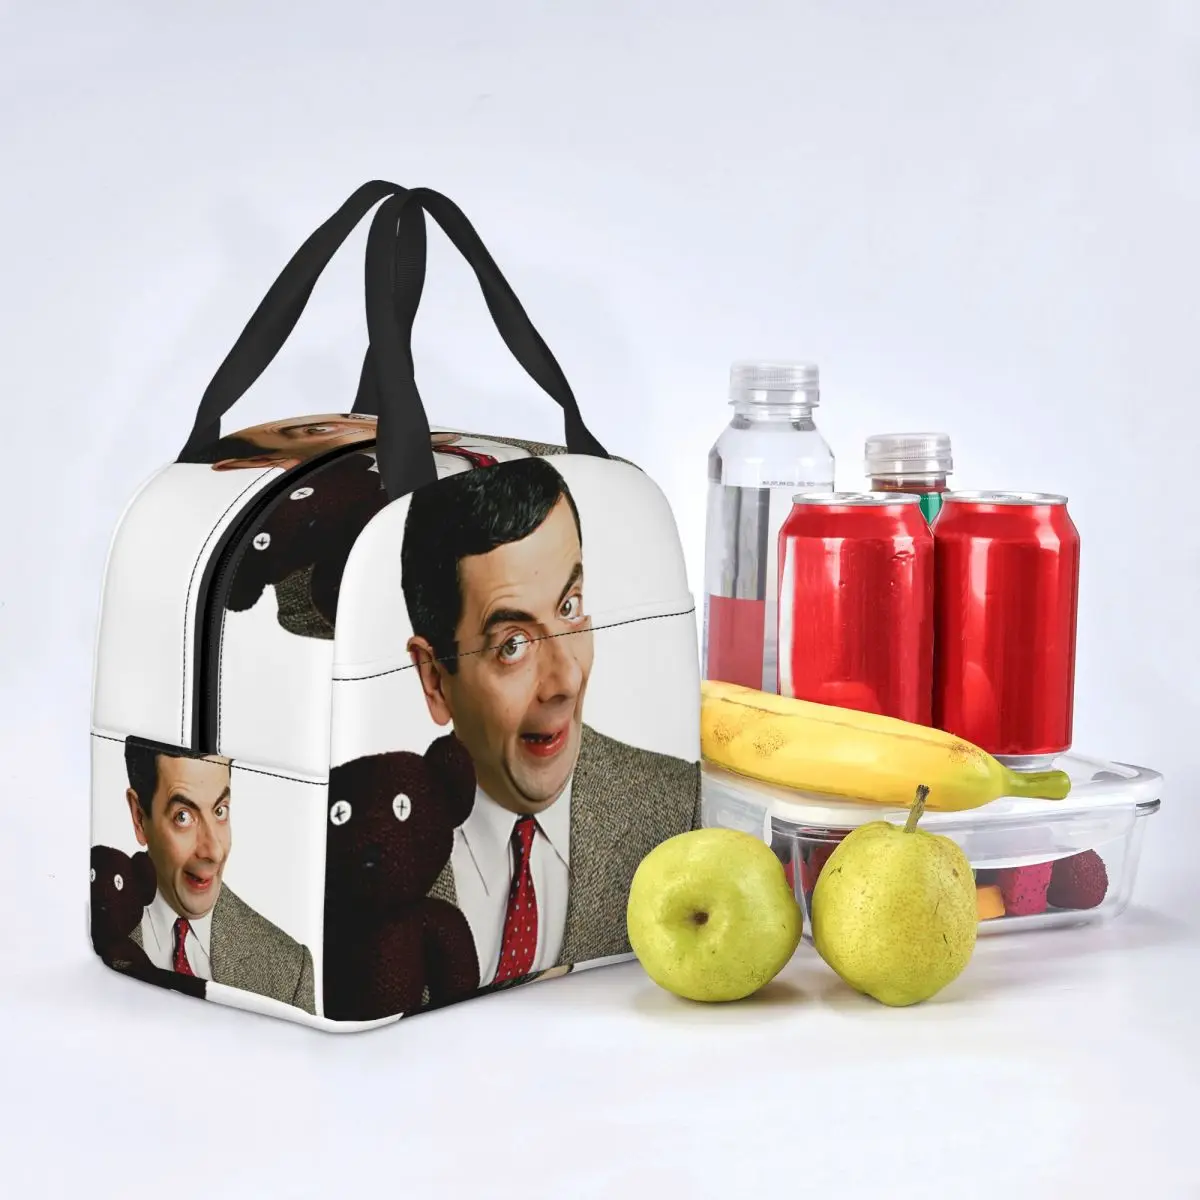 Mr Bean With Teddy Bear Rowan Atkinson Insulated Lunch Bags for Camping Travel Waterproof Thermal Cooler Lunch Box Women Kids images - 6